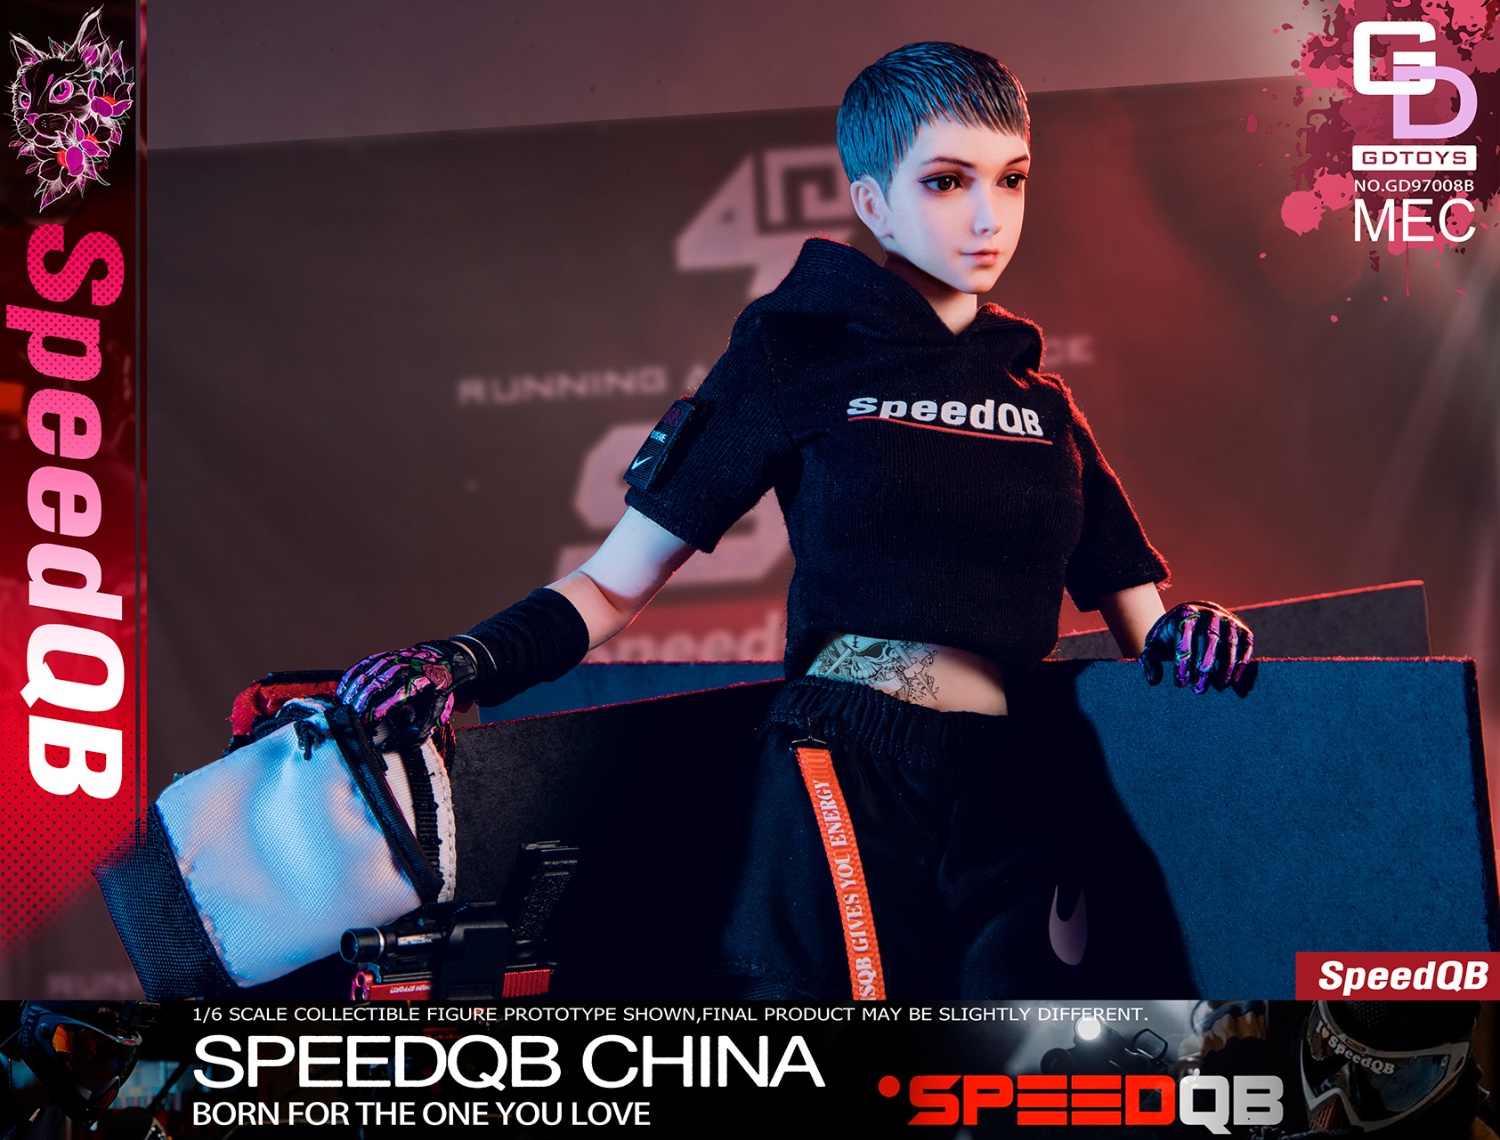 NEW PRODUCT: SpeedQB - Competitive Sports Charge Girl (GD97008B) 1846